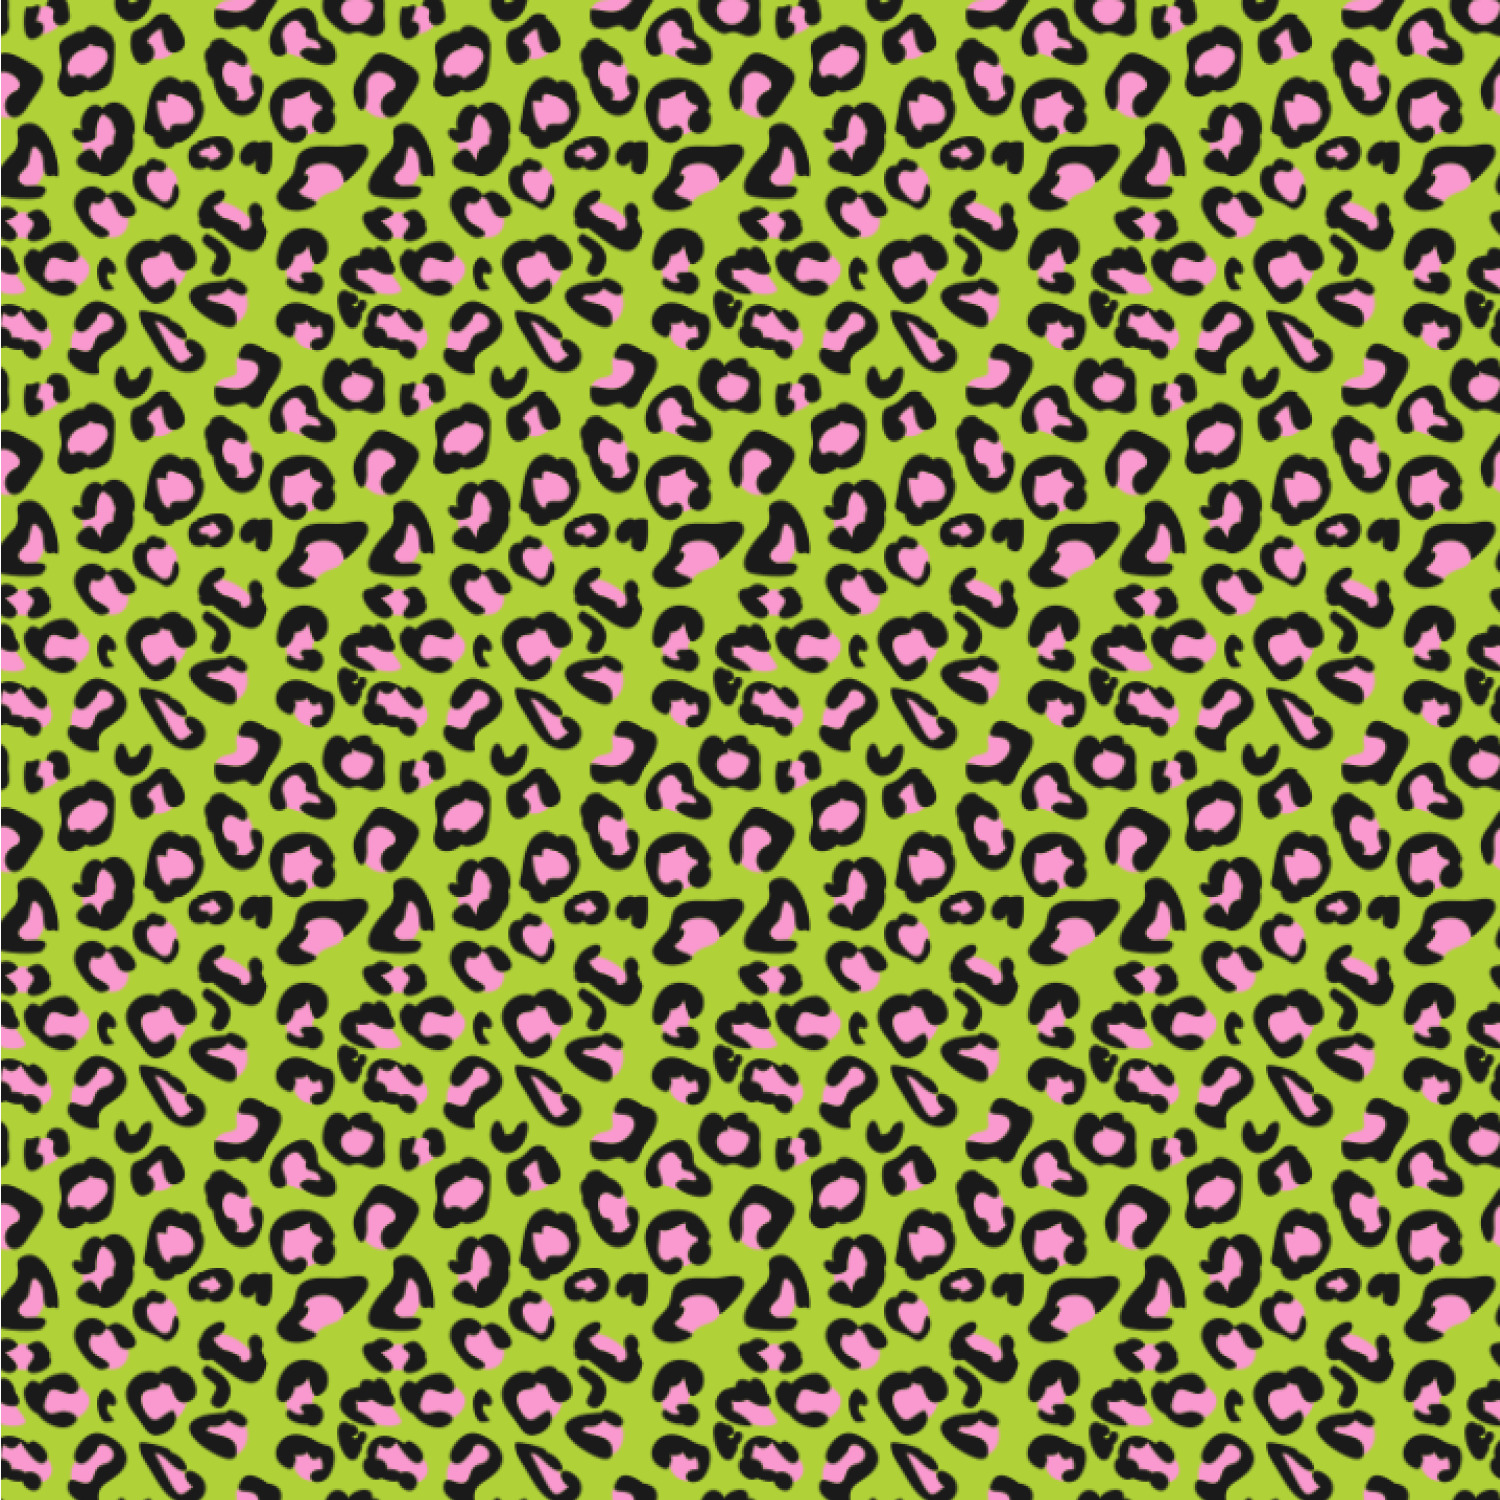 Pink & Lime Green Leopard Wallpaper & Surface Covering